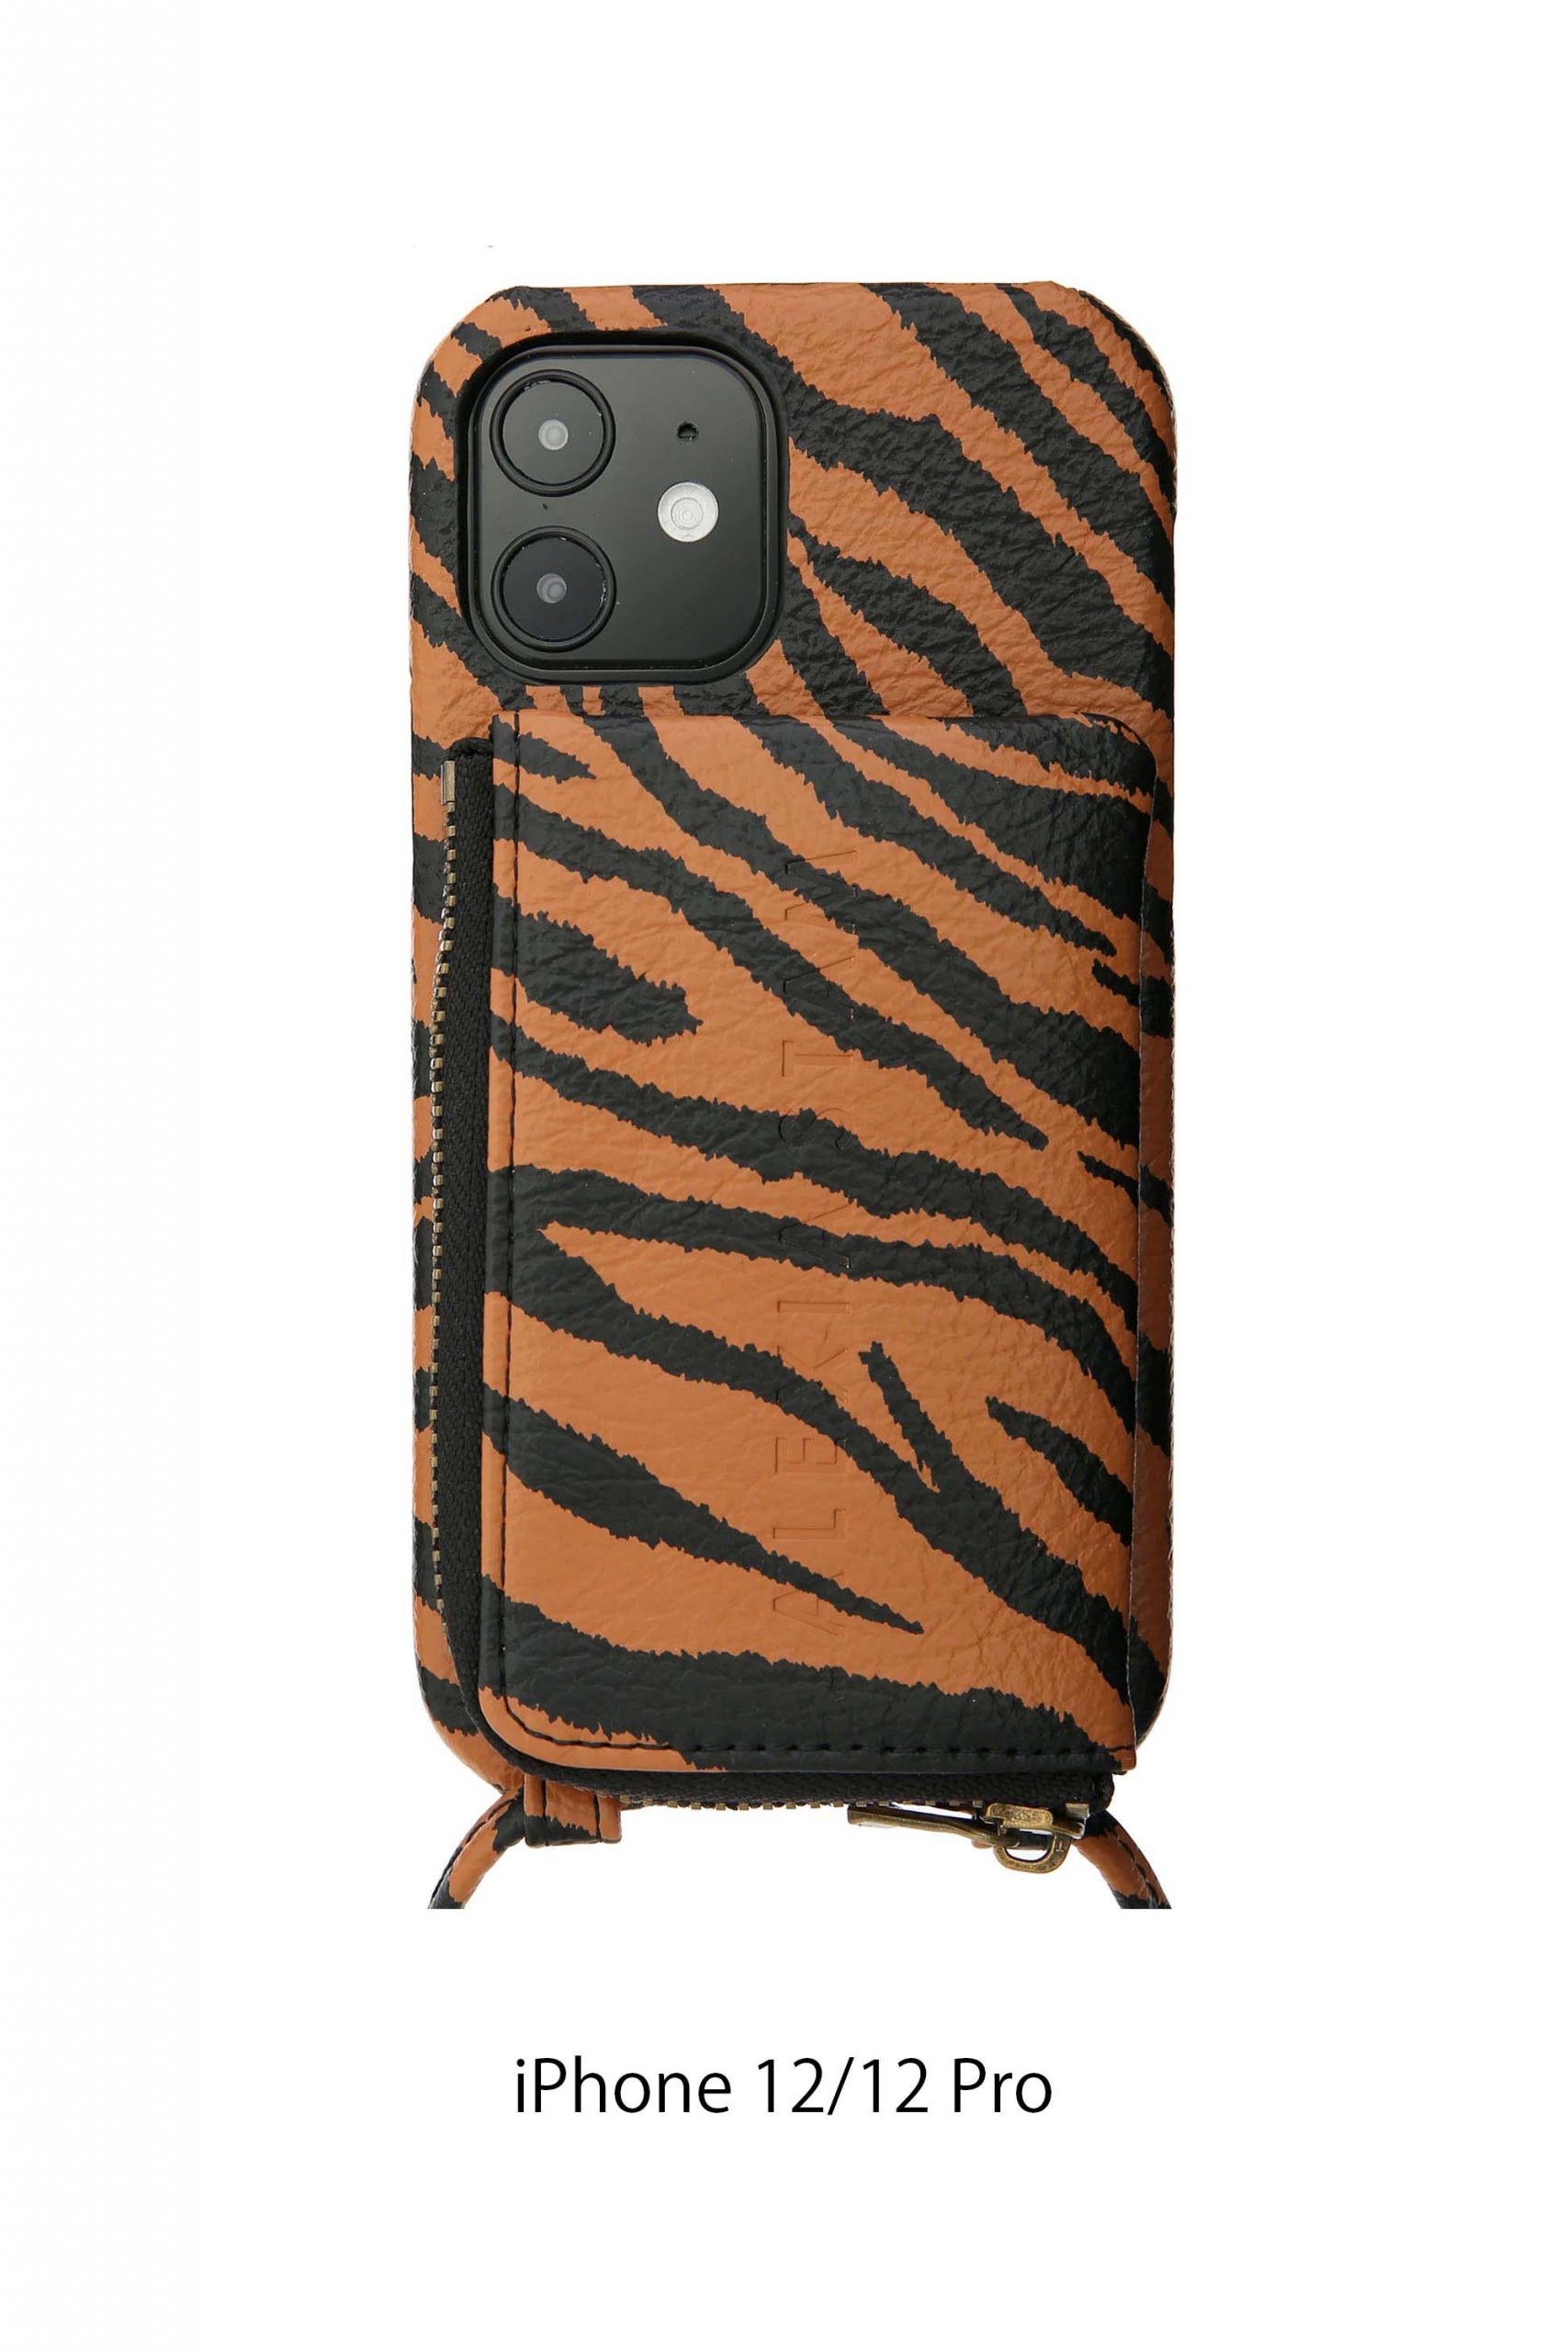 Eco Leather iPhone Case With Strap Zebra 11